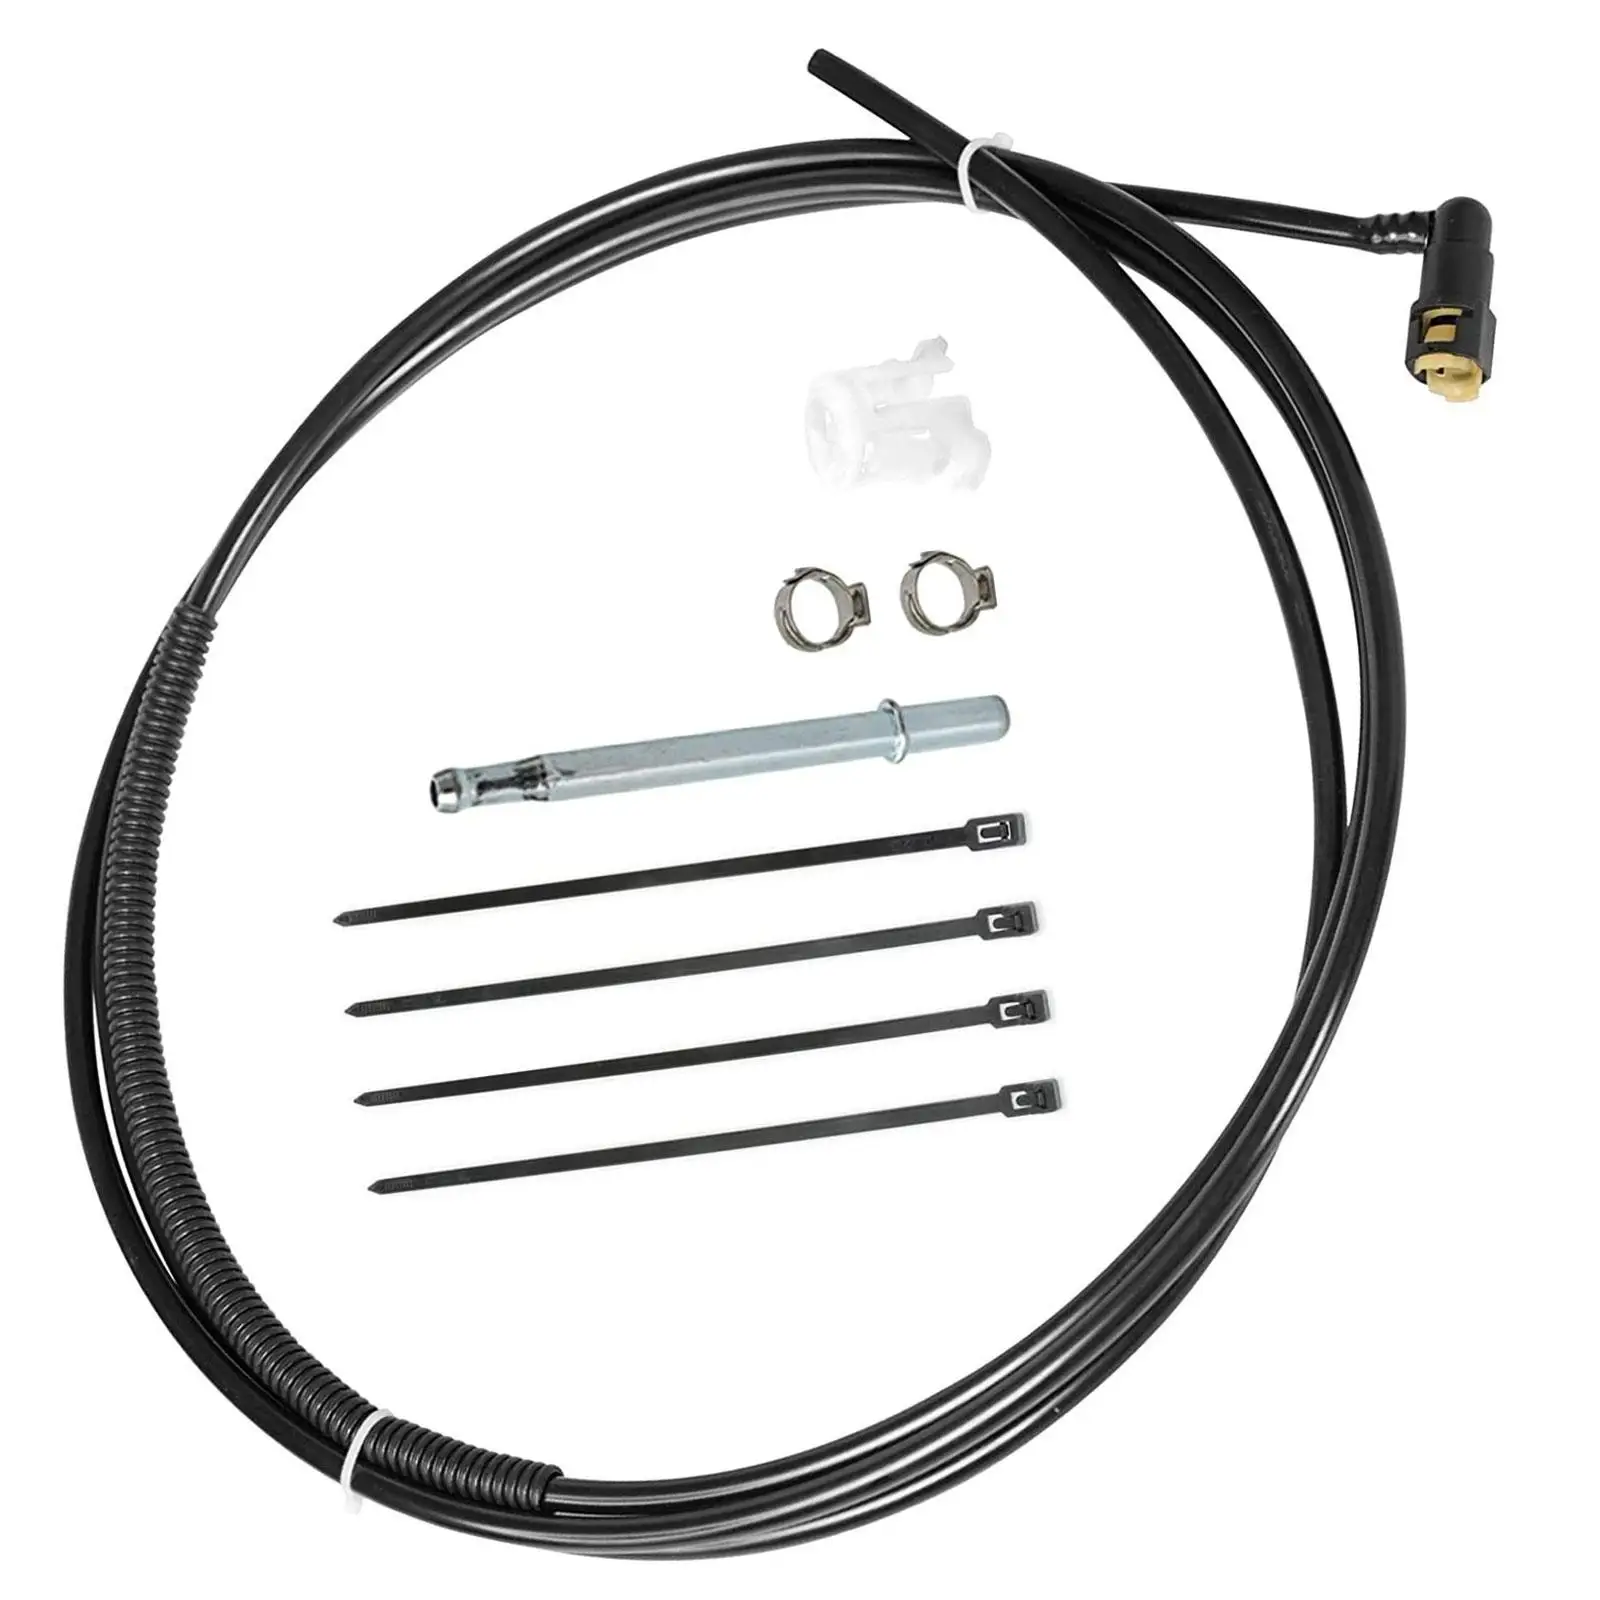 Pick up Gas Fuel Line Fl-Fg0212 Replacement Durable Spare Parts High Performance for Dodge RAM Pick up 1500 2500 3500